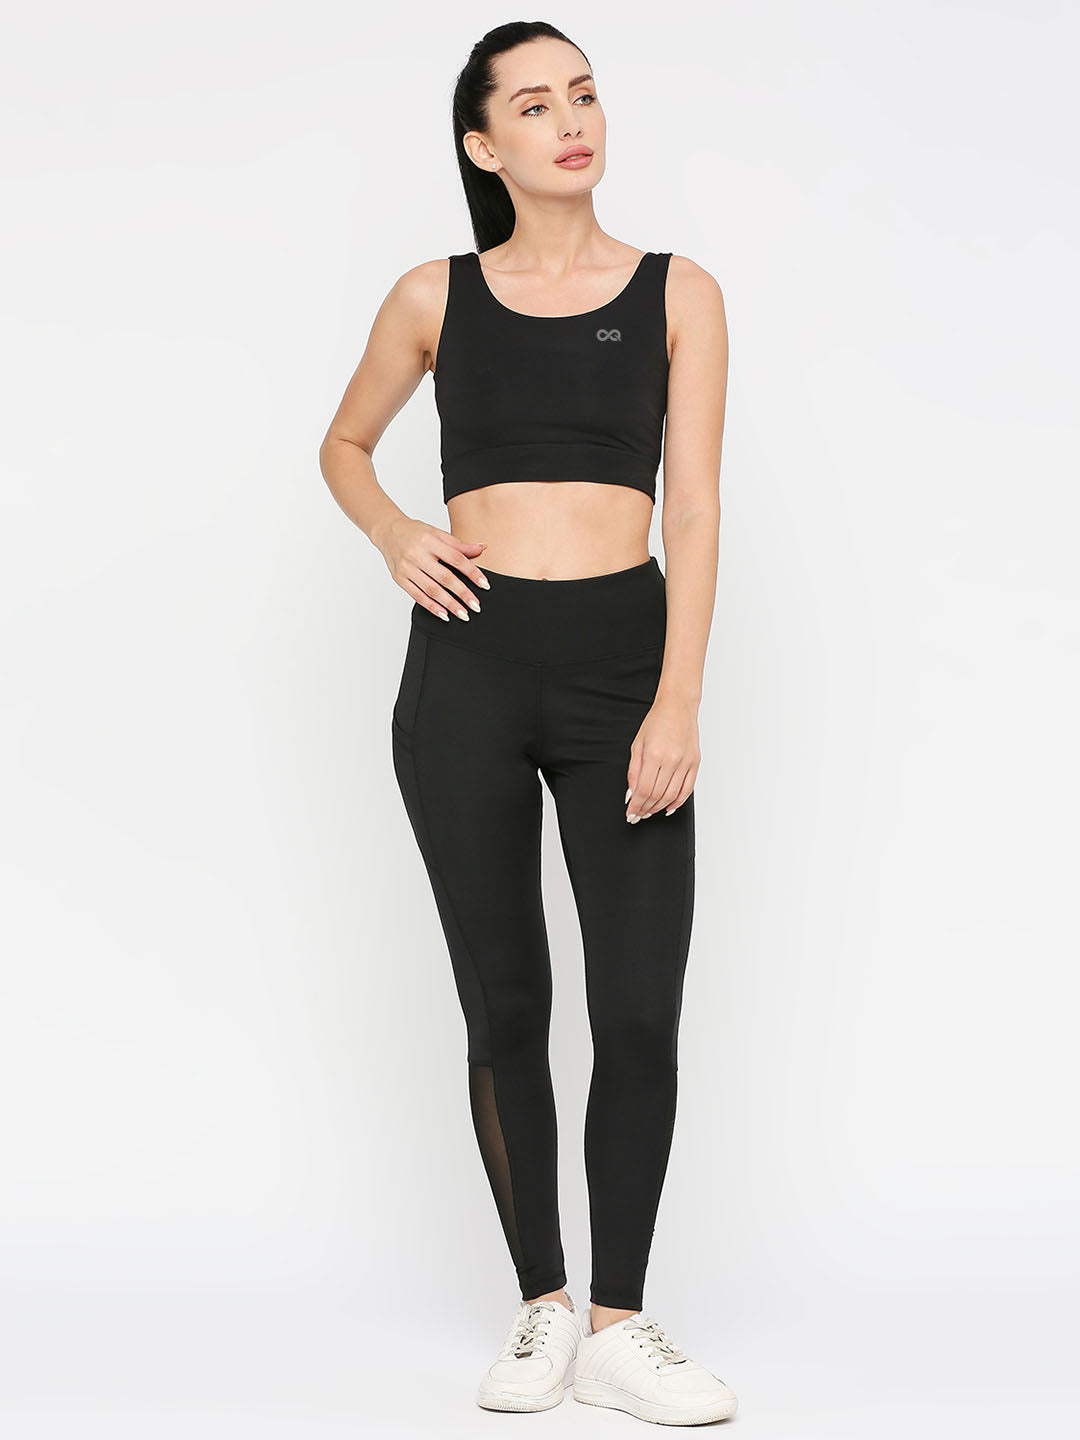 Women's Black Sports Bra - Stay Supported and Stylish